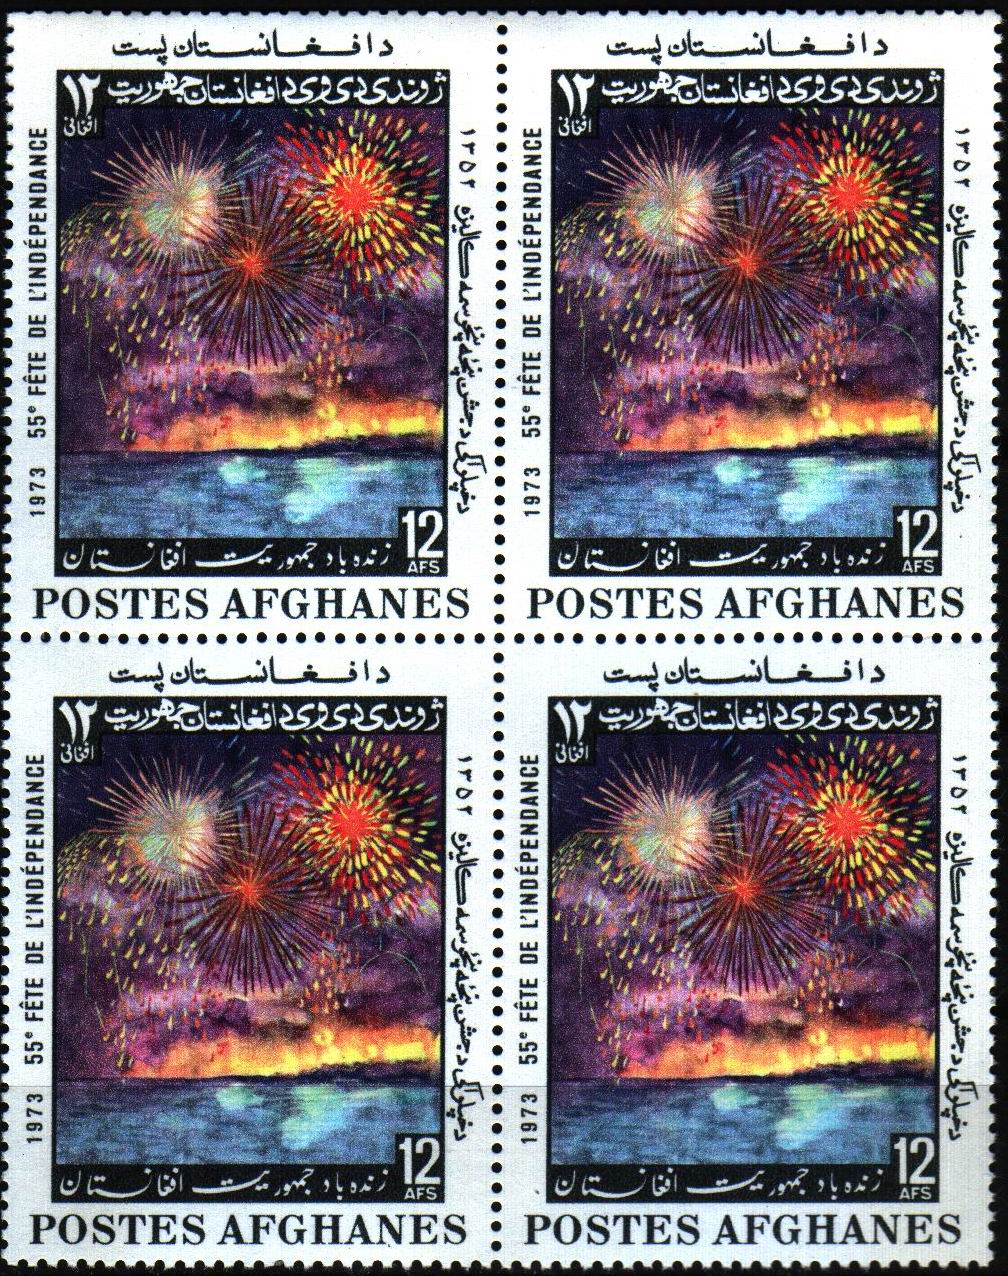 Afghanistan 1973 Stamp Independence Anniversary Fireworks MNH - Click Image to Close